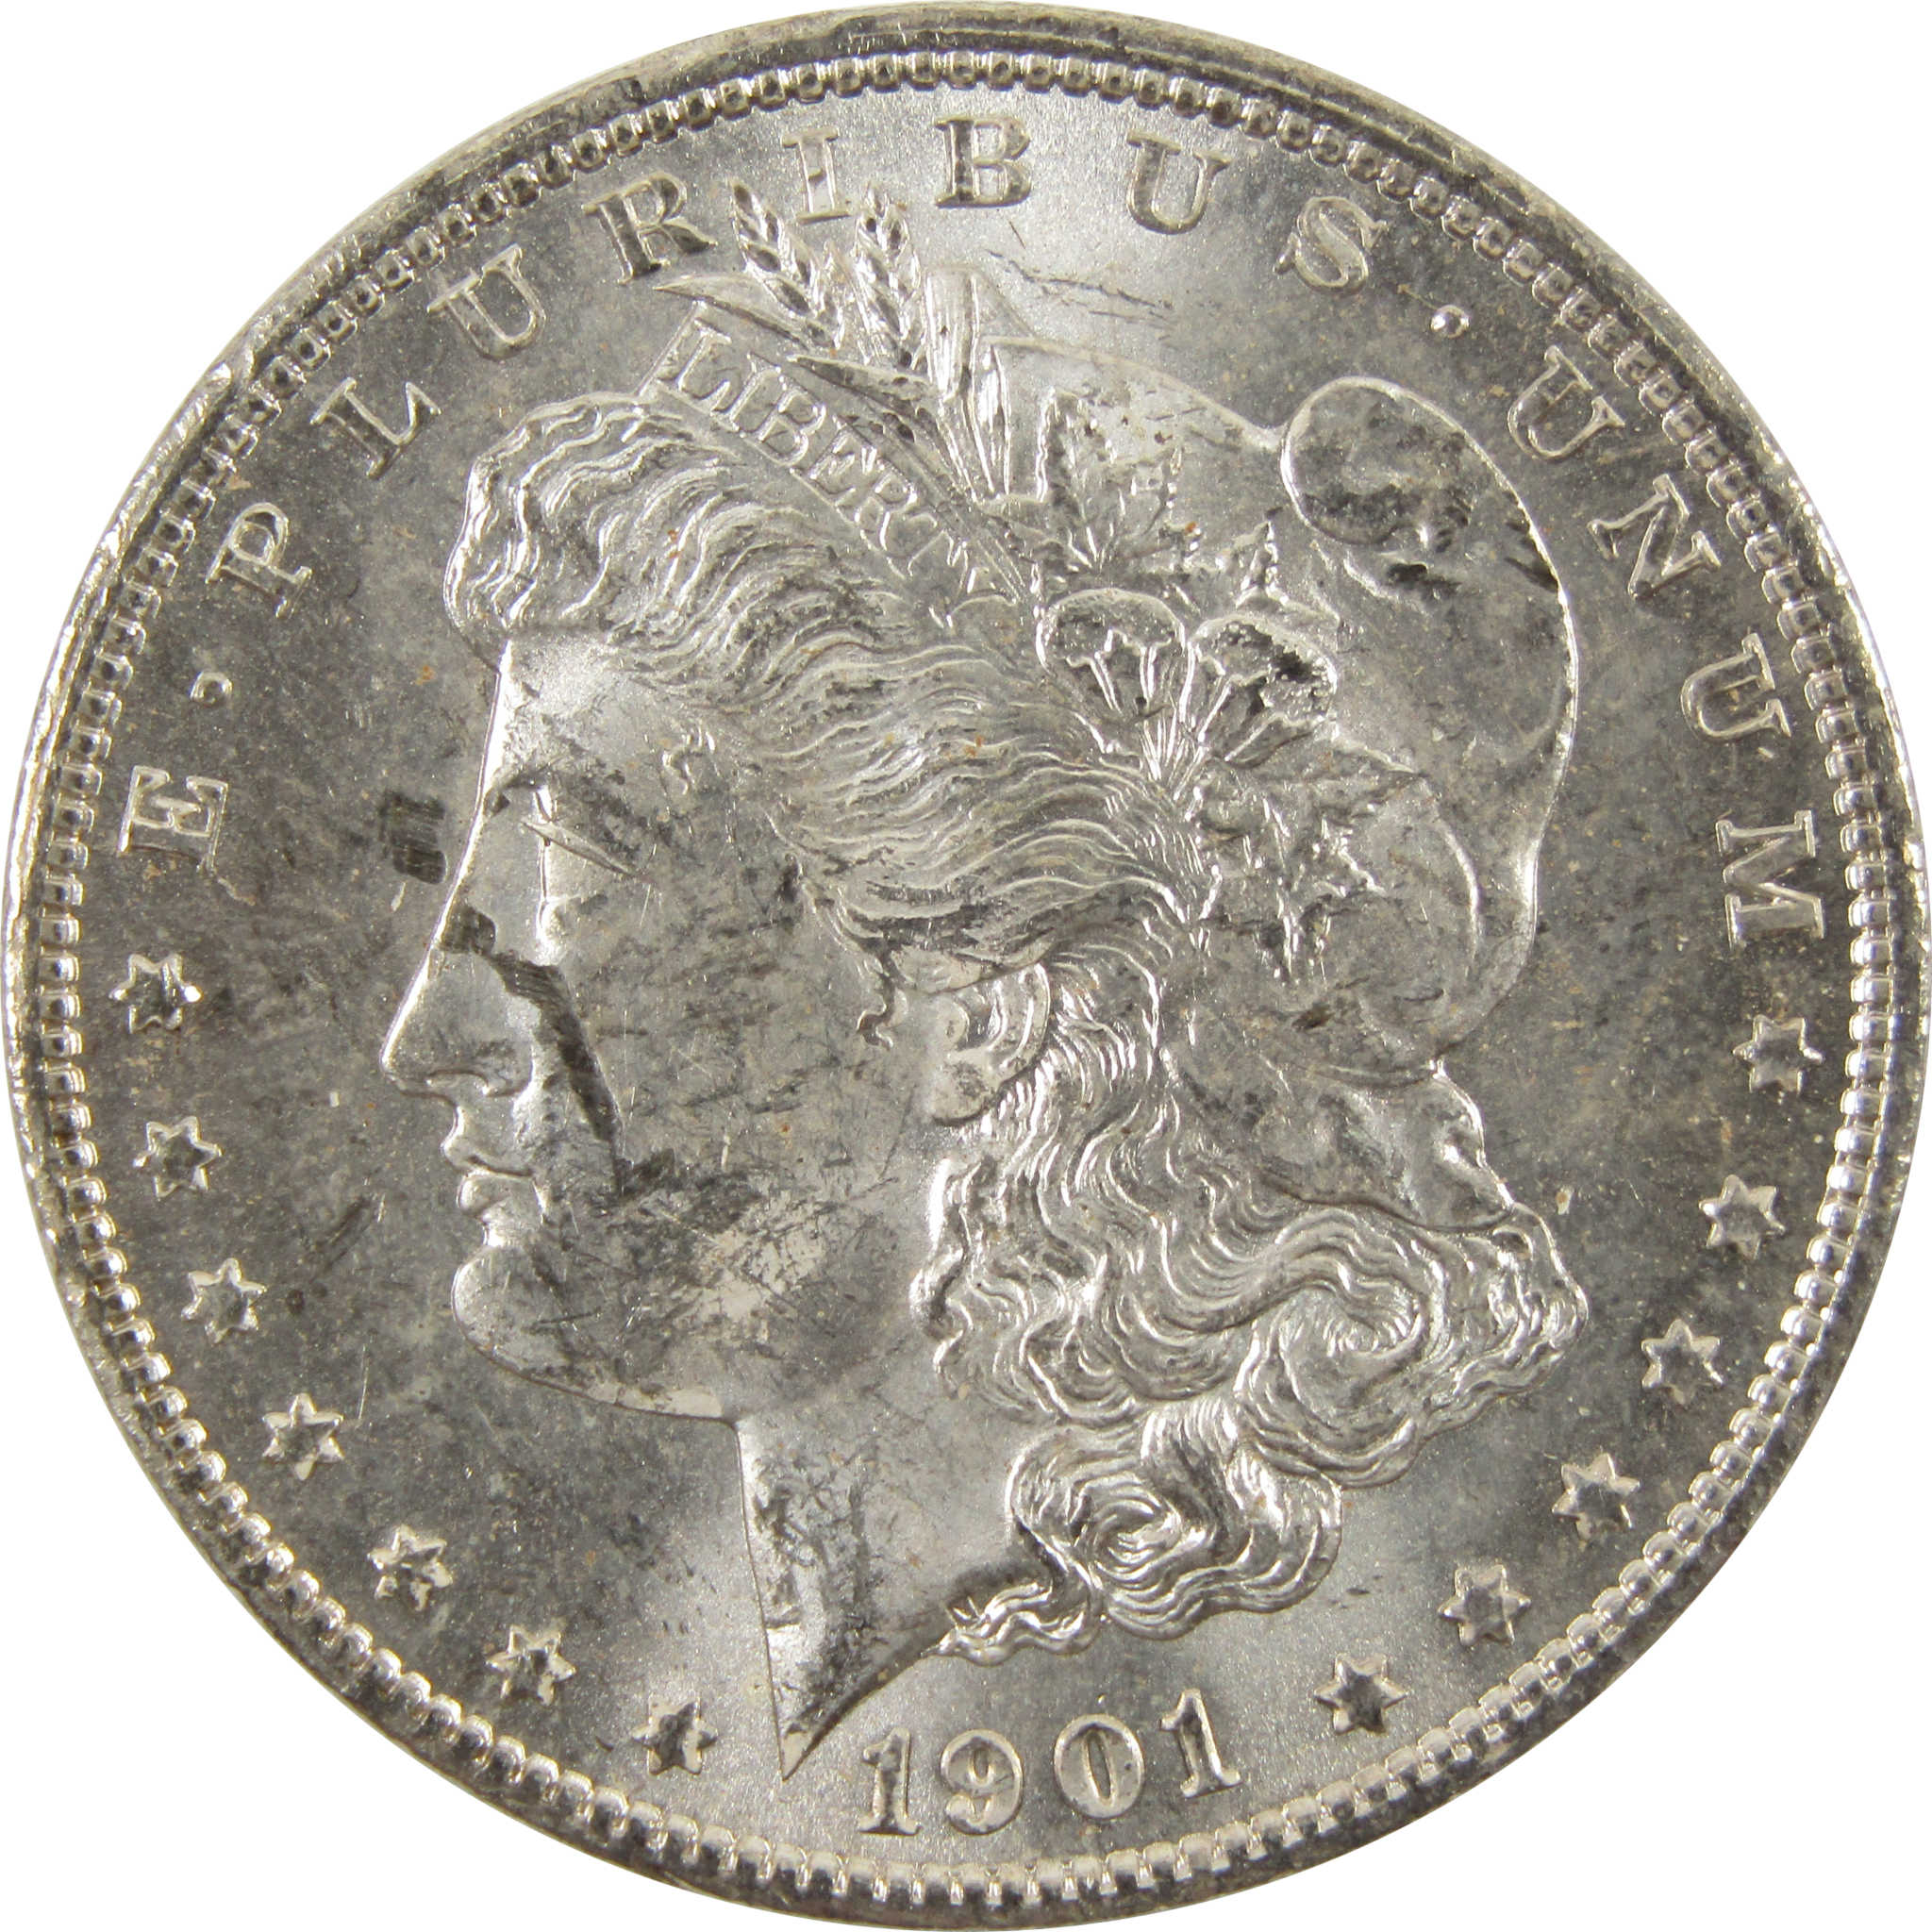 1901 O Morgan Dollar Uncirculated Details 90% Silver $1 SKU:I10467 - Morgan coin - Morgan silver dollar - Morgan silver dollar for sale - Profile Coins &amp; Collectibles